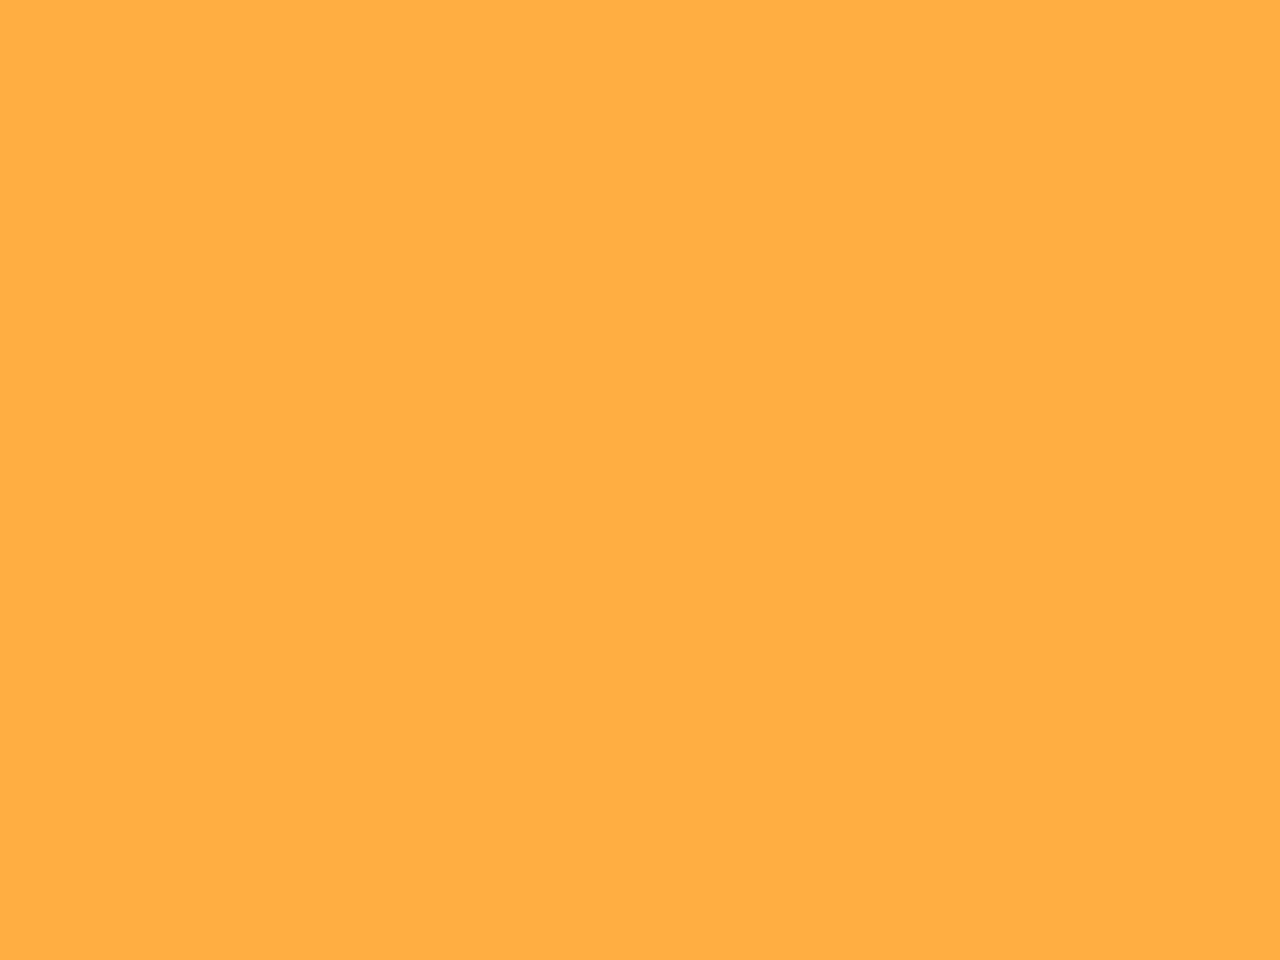 1280x960 Yellow Orange Solid Color Background